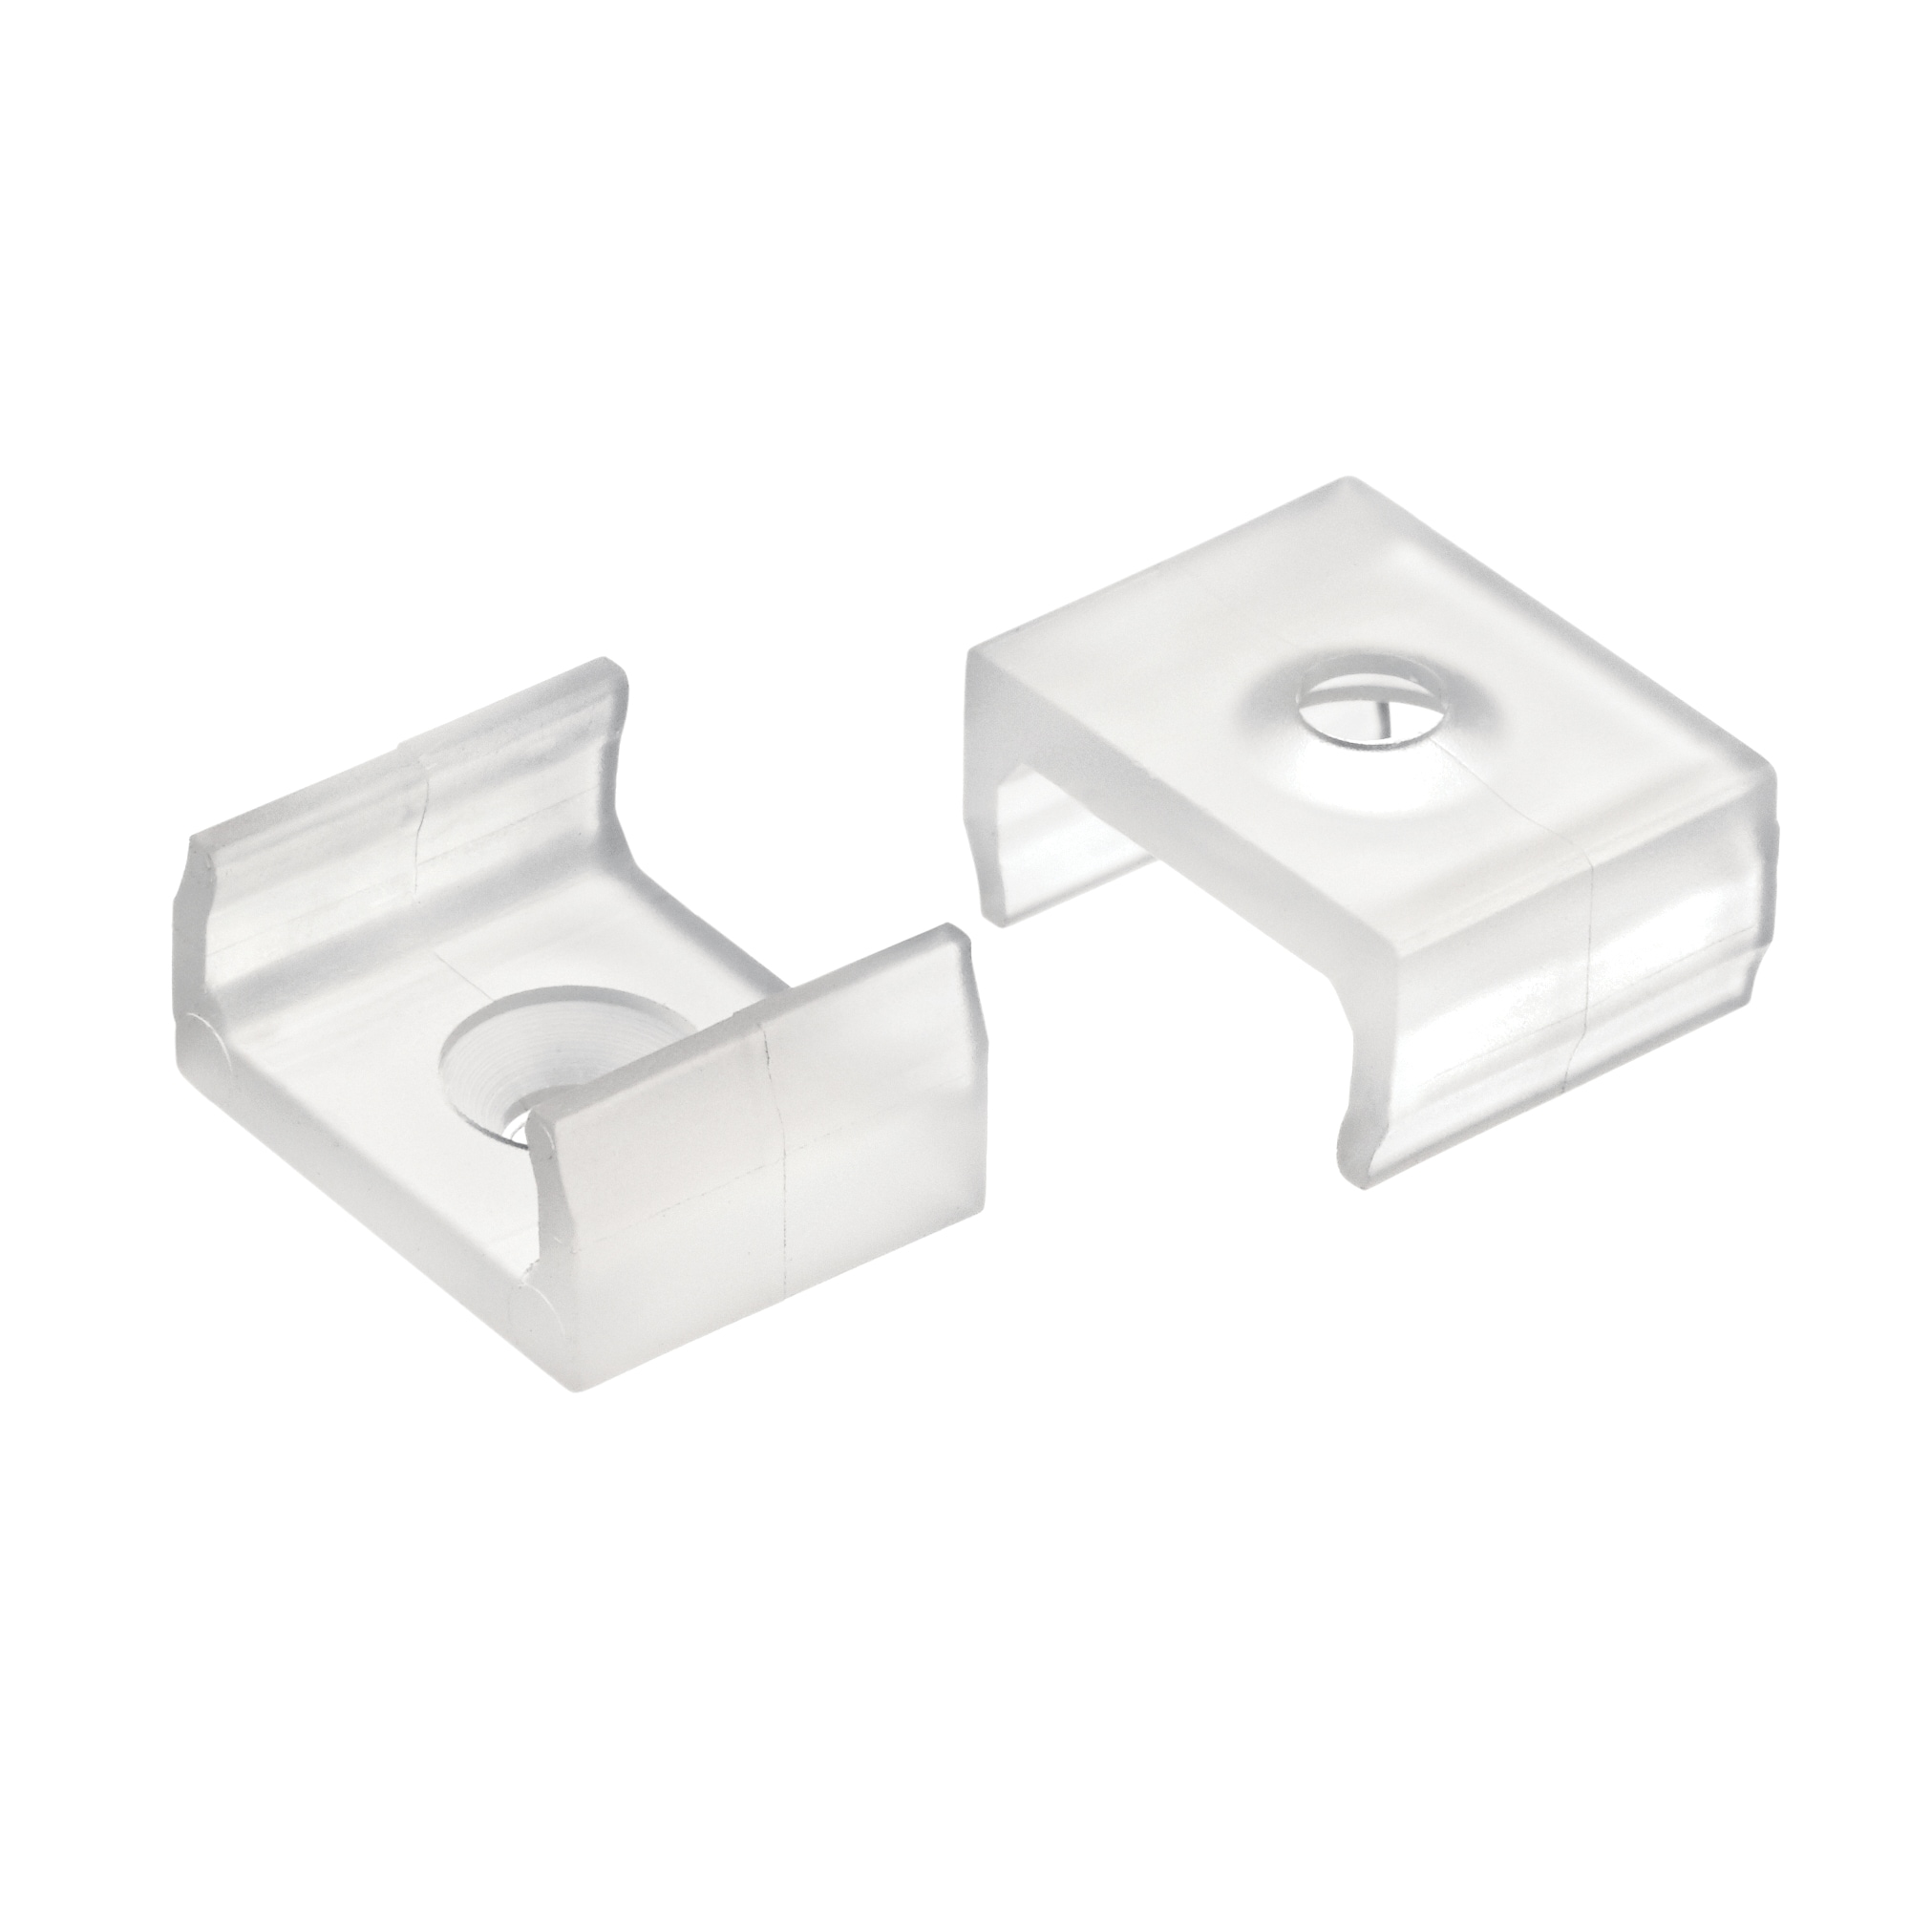 Kichler ILS TE Series Tape Extrustion Mounting Clips - Clear - 1TEM1STSFMCLR